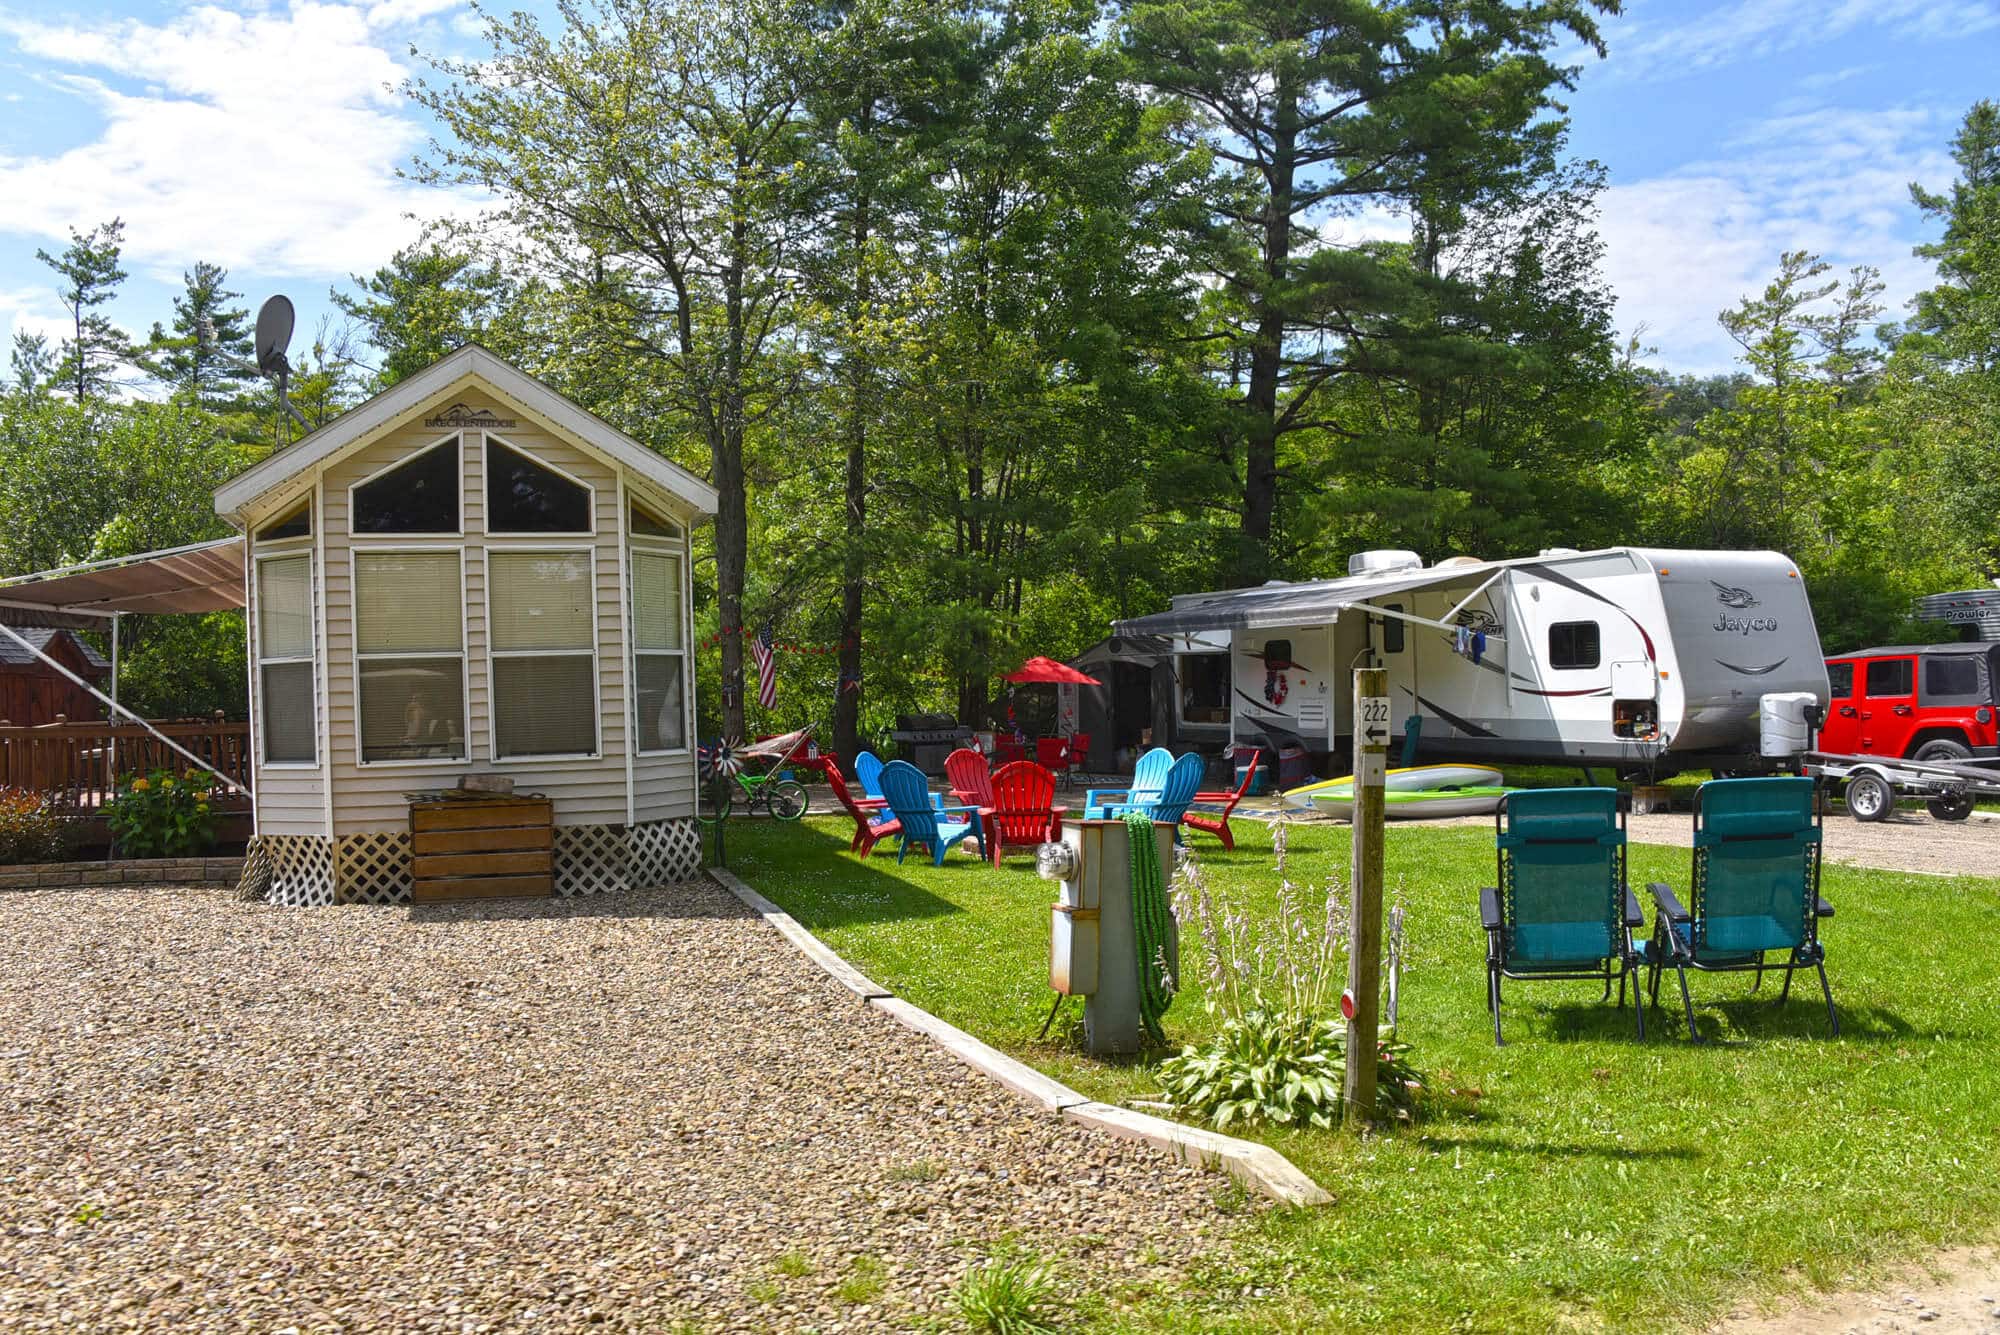 Completely customize your permanent campsite to turn it into a home away from home.